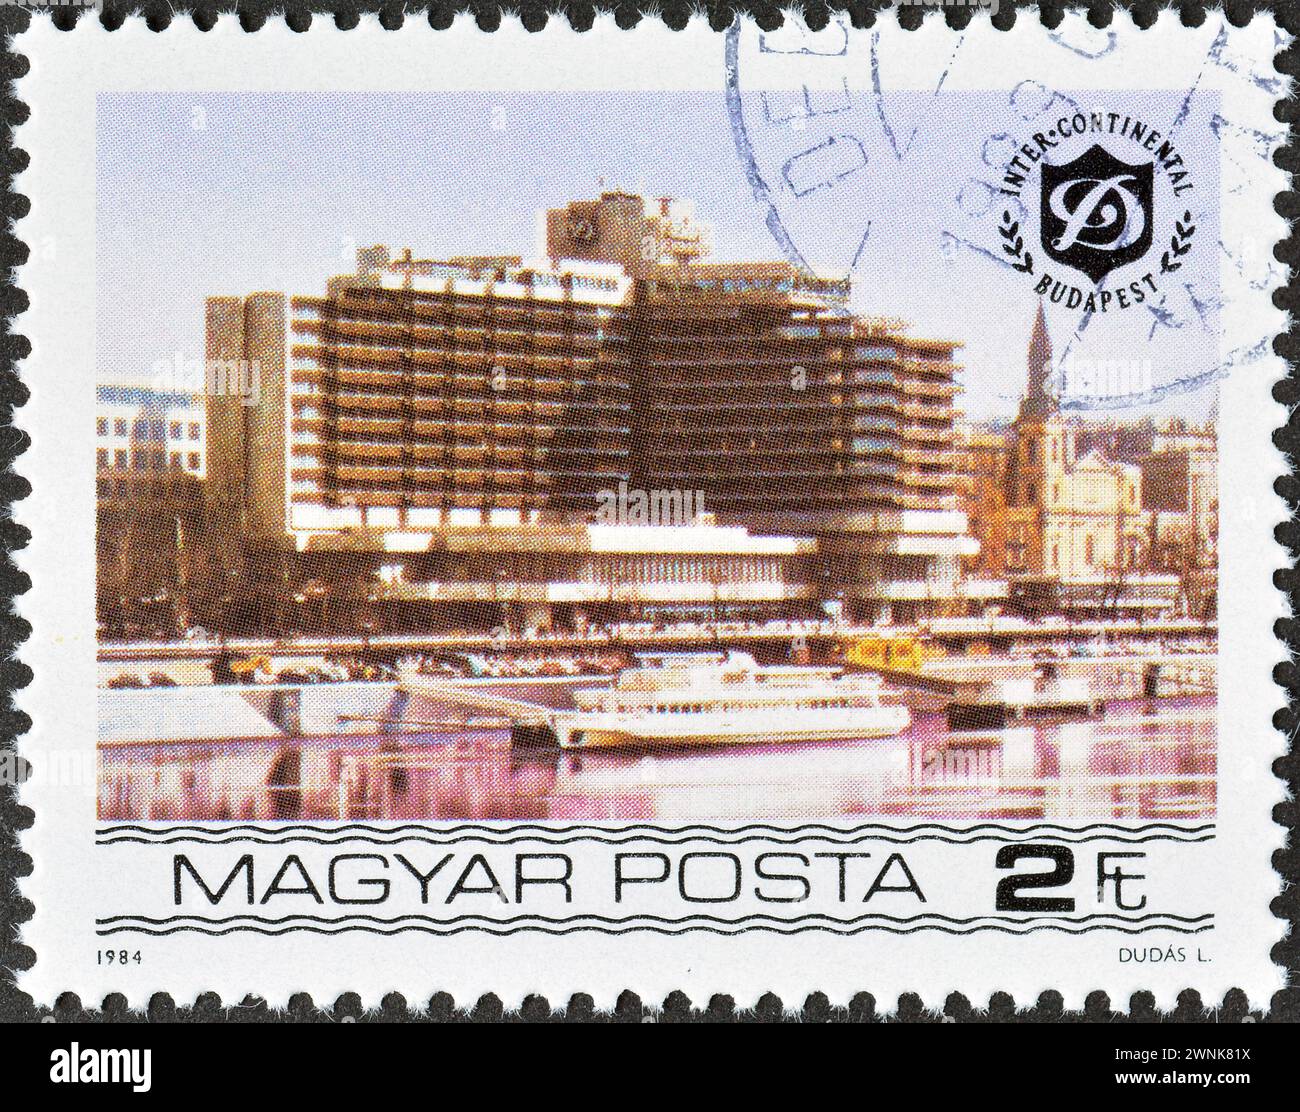 Cancelled postage stamp printed by Hungary, that shows Duna Intercontinental, Budapest, Budapest Riverside Hotels, circa 1984. Stock Photo